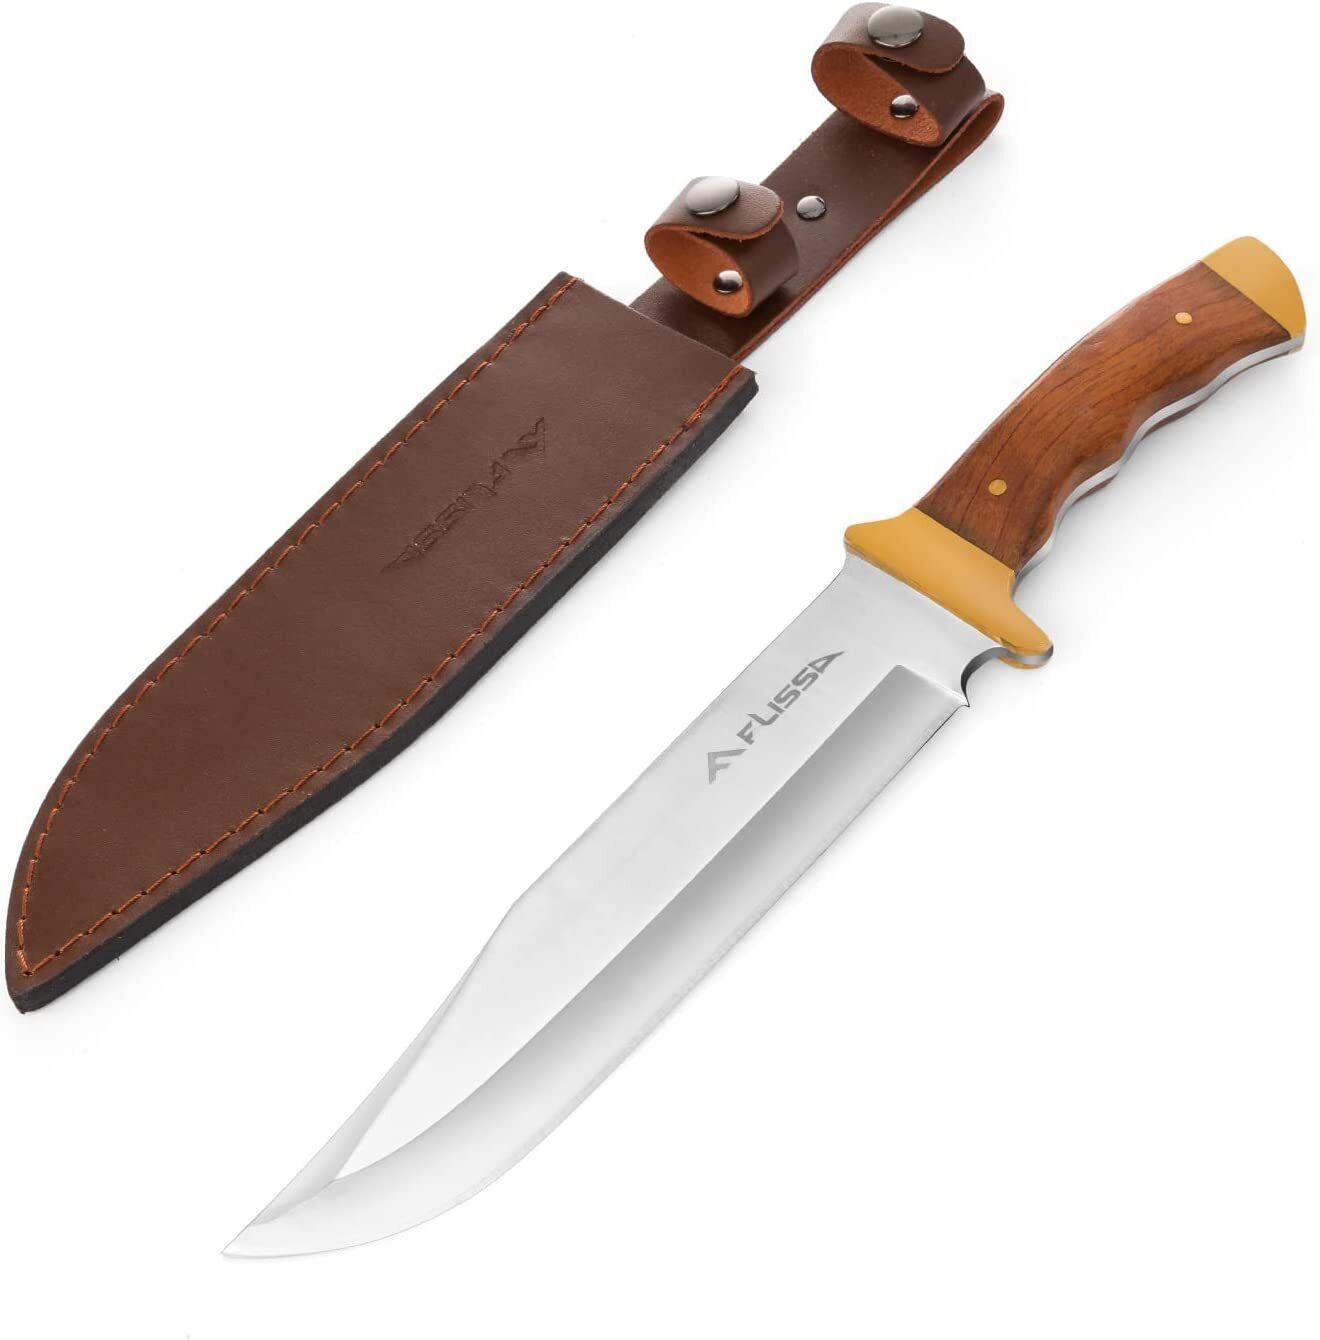 Flissa 14-inch Bowie Knife, Full-tang Fixed Blade Knife with Wood Handle 17.8 oz